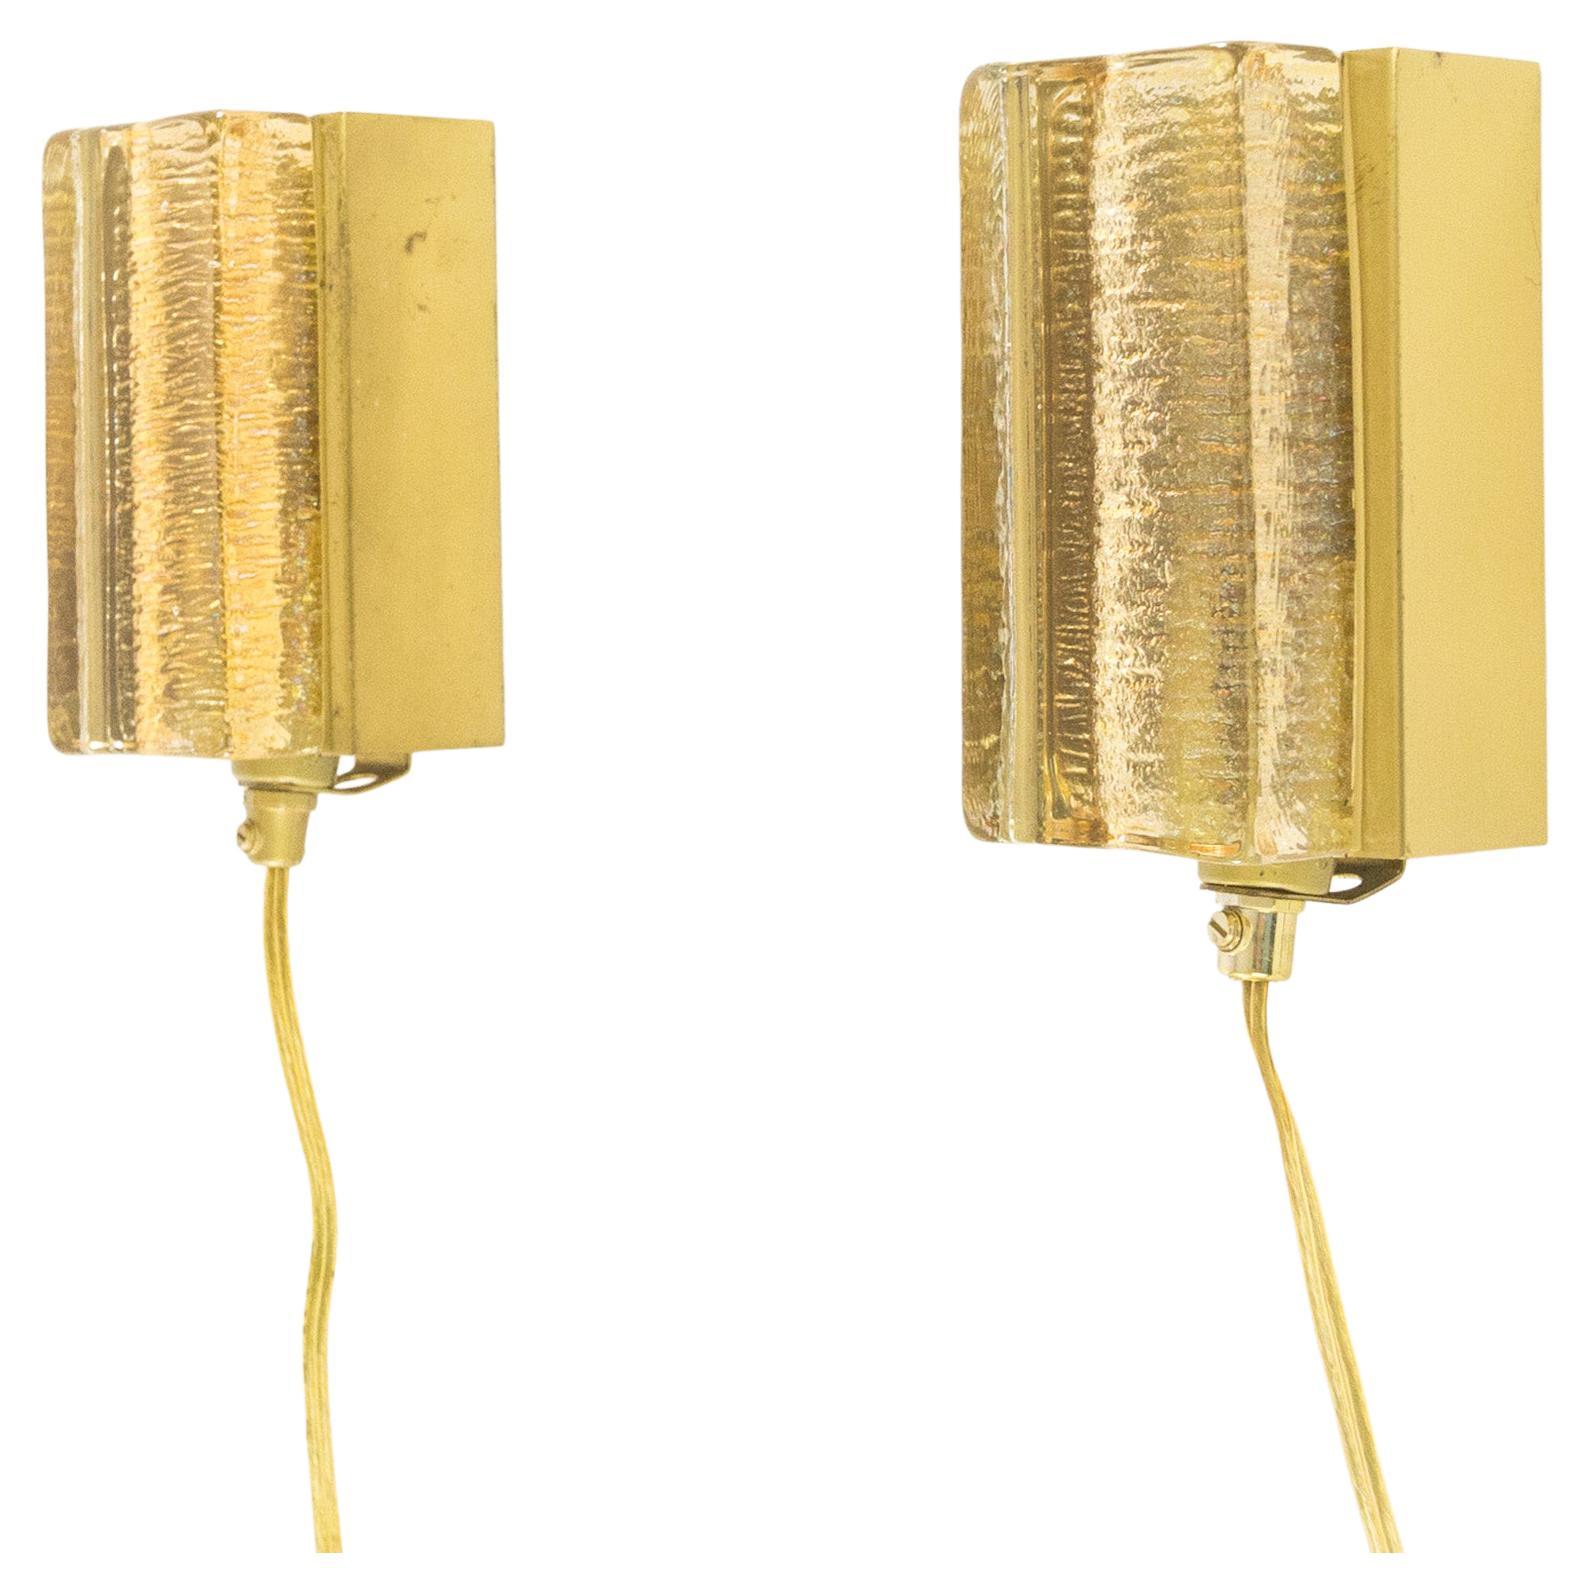 Pair of Atlantic Wall Lamps by Vitrika in Gold, 1970s For Sale